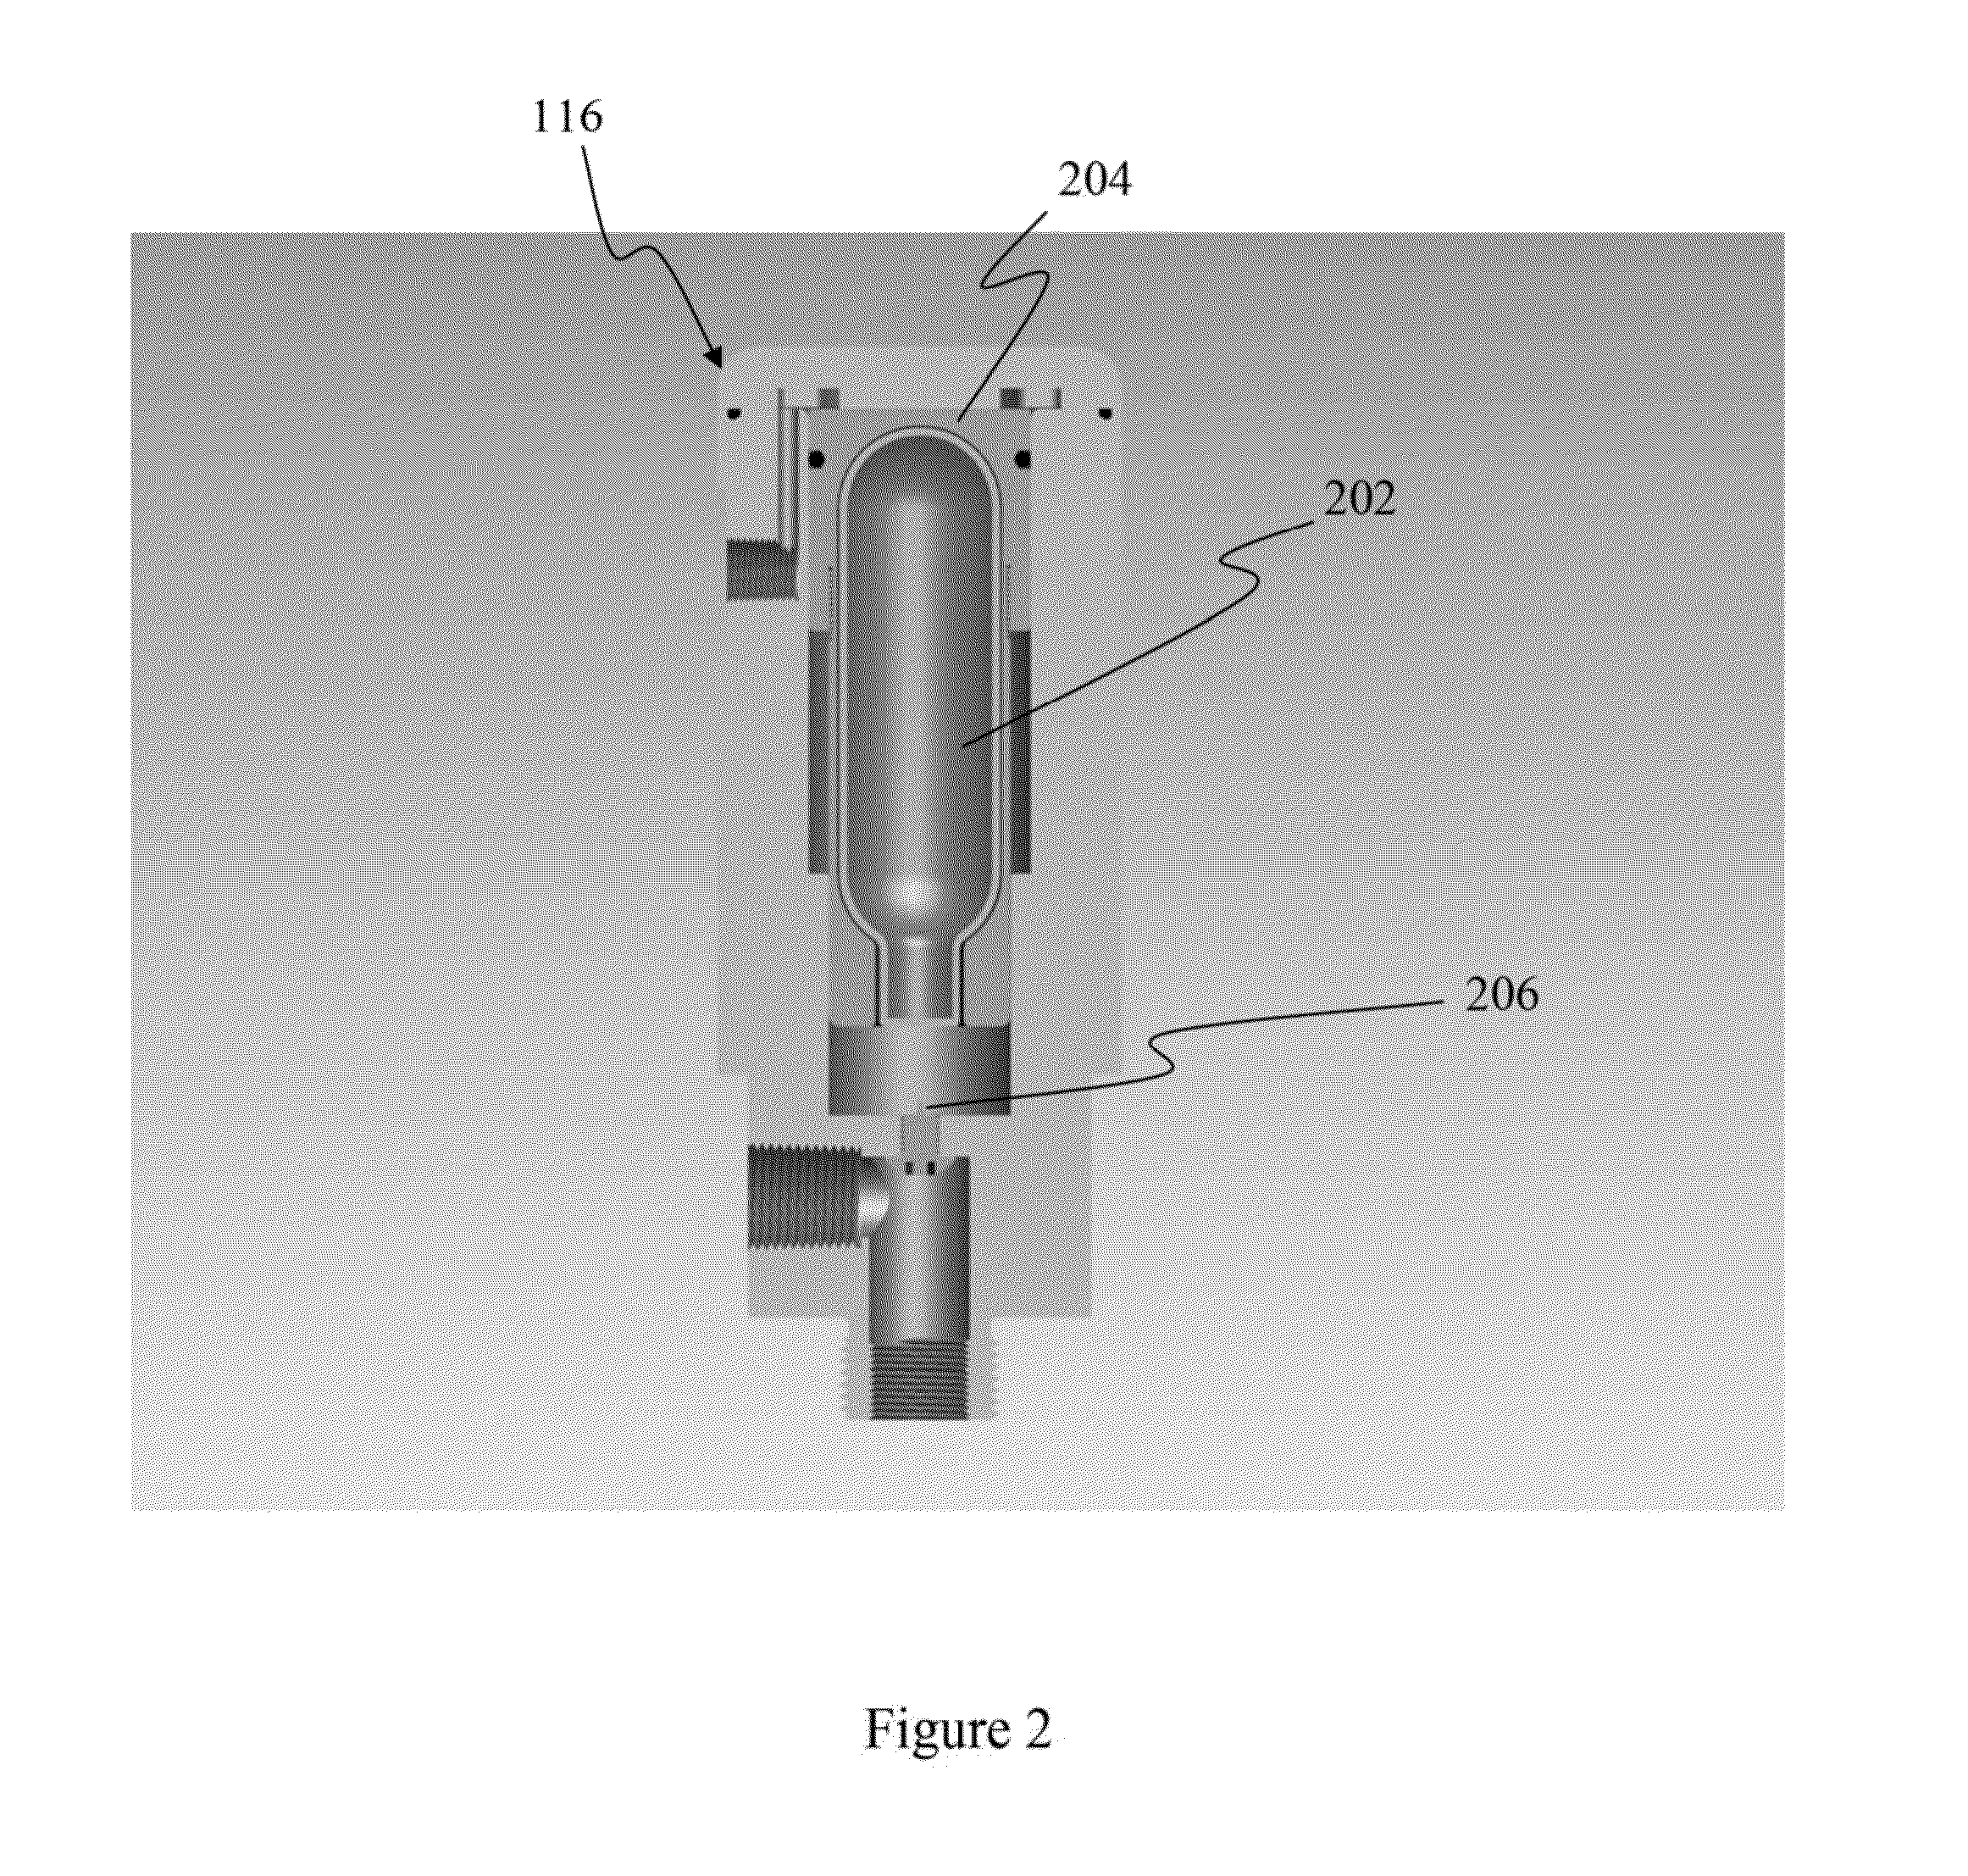 Methods and apparatus for passive non-electrical dual stage fire suppression